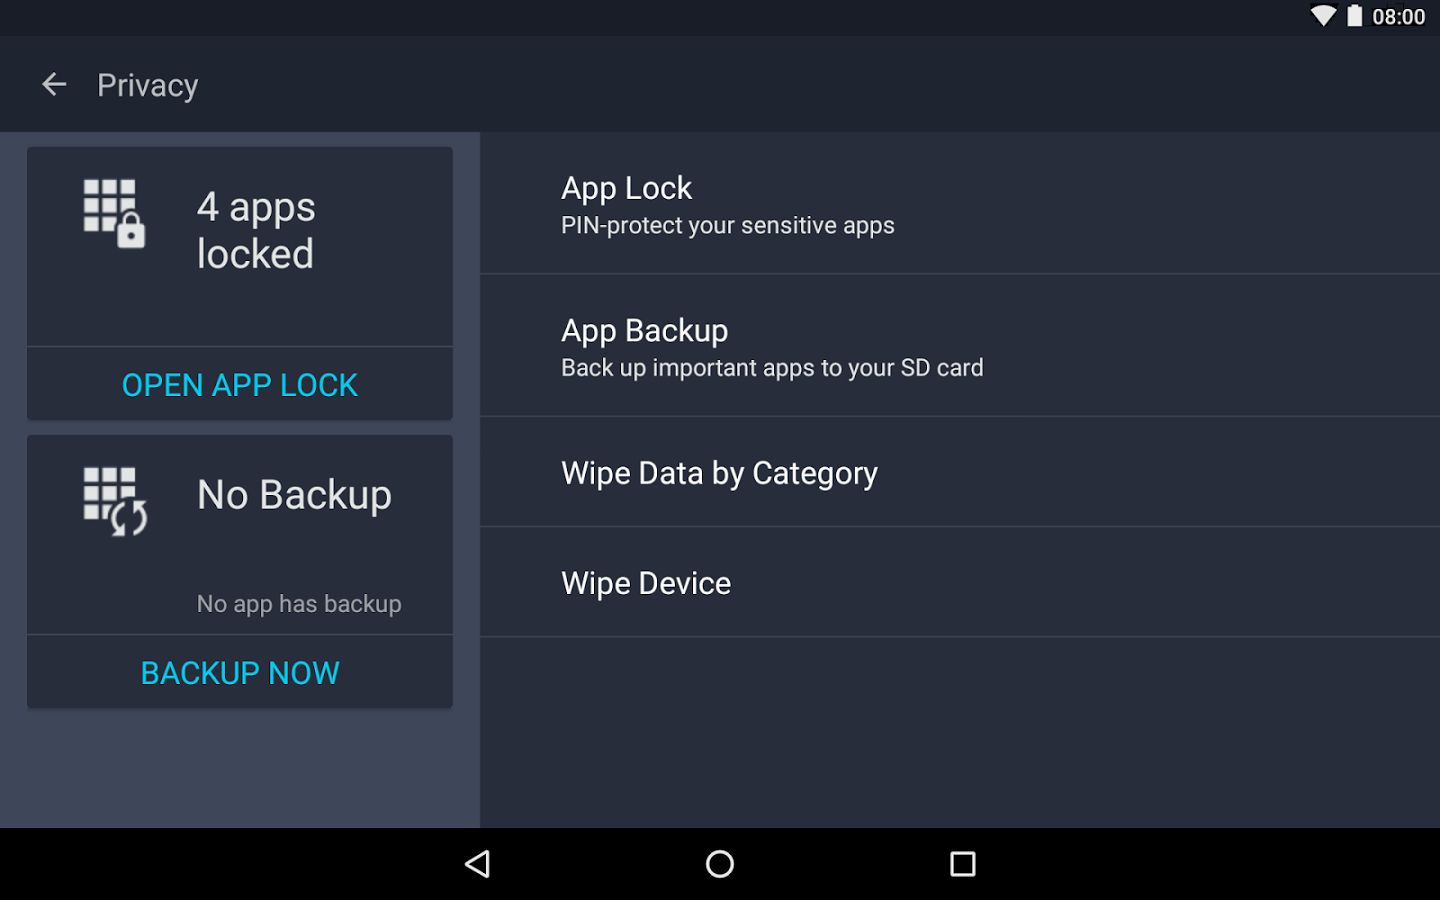 AntiVirus Pro Android Security App Review